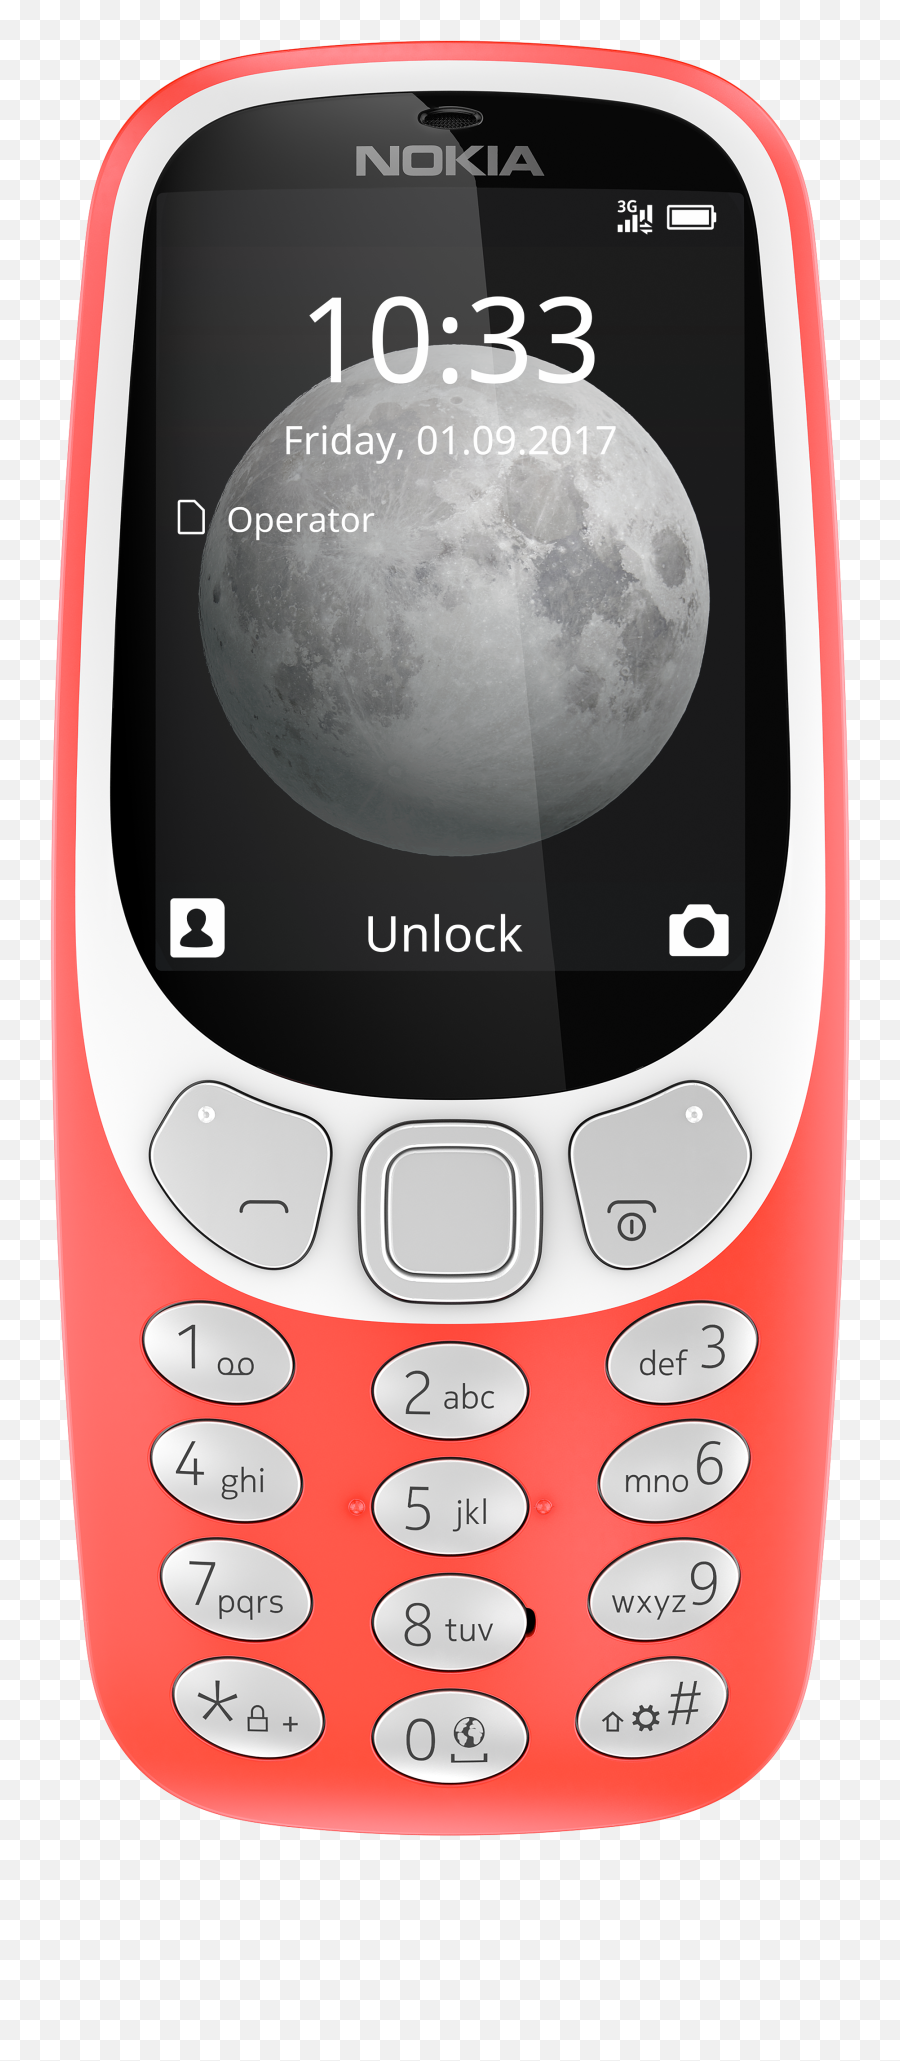 Nokia 3310 Dual Sim Basic Phone Feature With 3g Png Lumia Icon Referbished